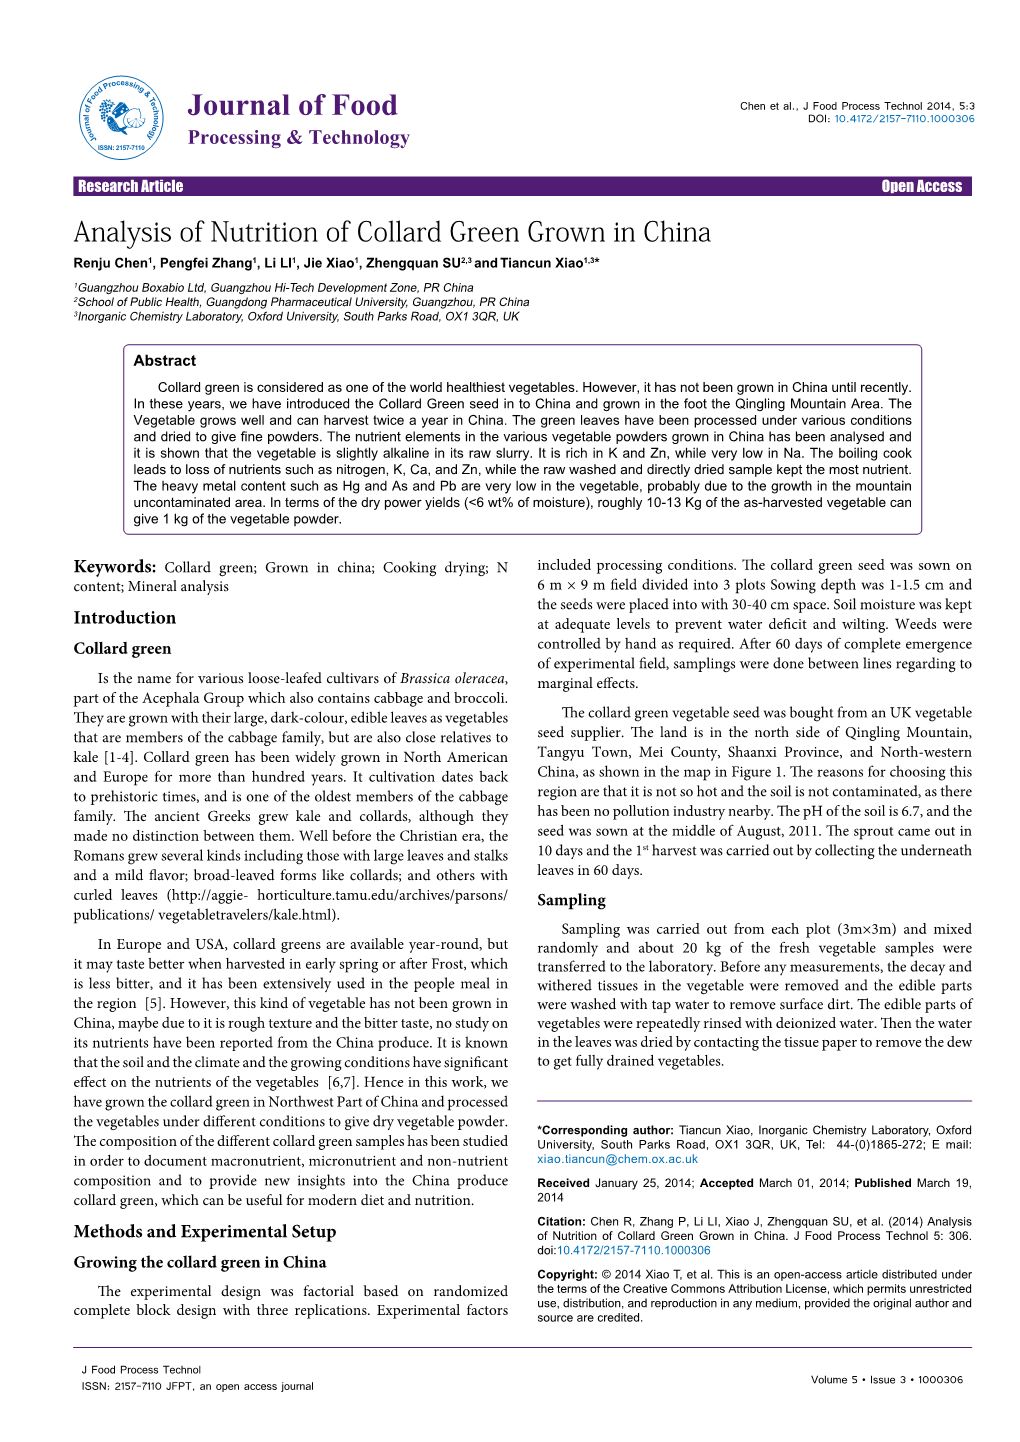 Analysis of Nutrition of Collard Green Grown in China